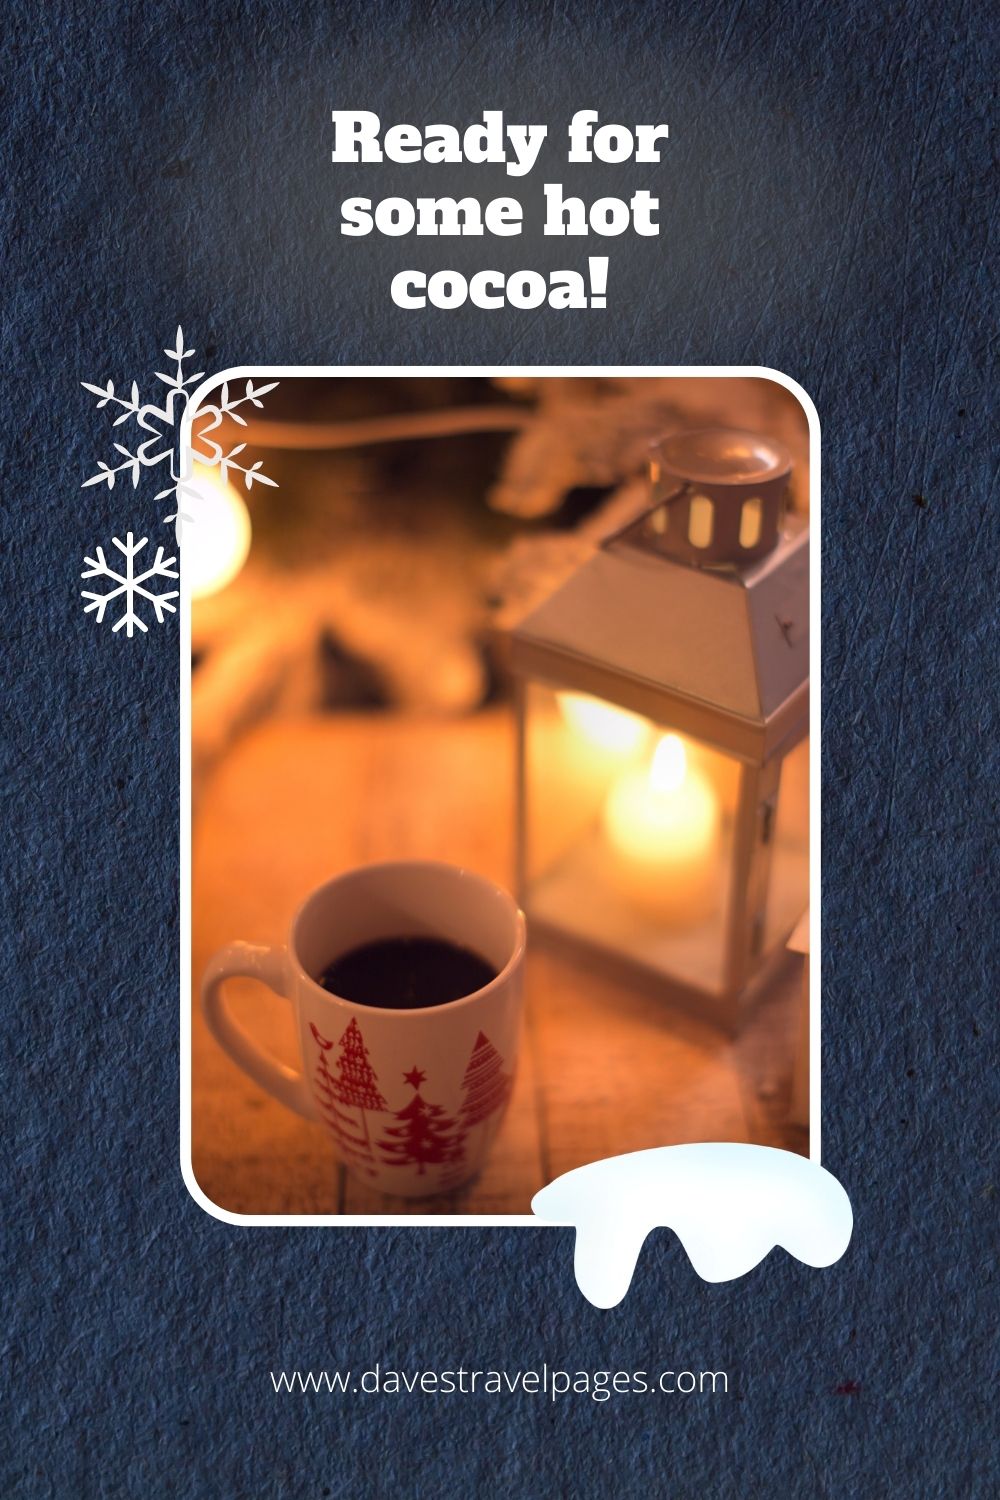 Ready for some hot cocoa!